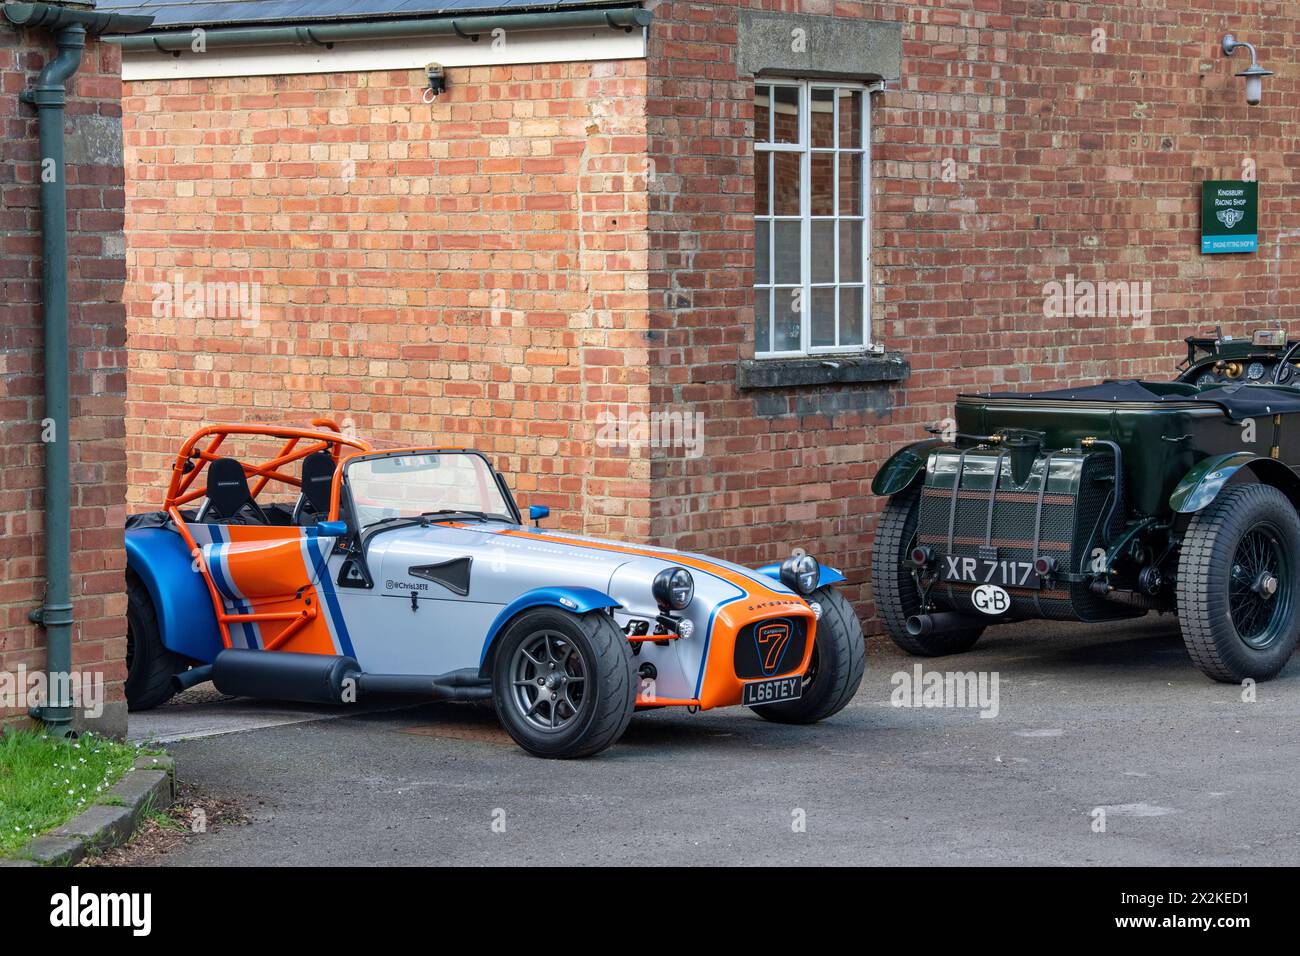 Caterham 7 sports car at Bicester Heritage centre sunday scramble event. Bicester, Oxfordshire, England. Stock Photo